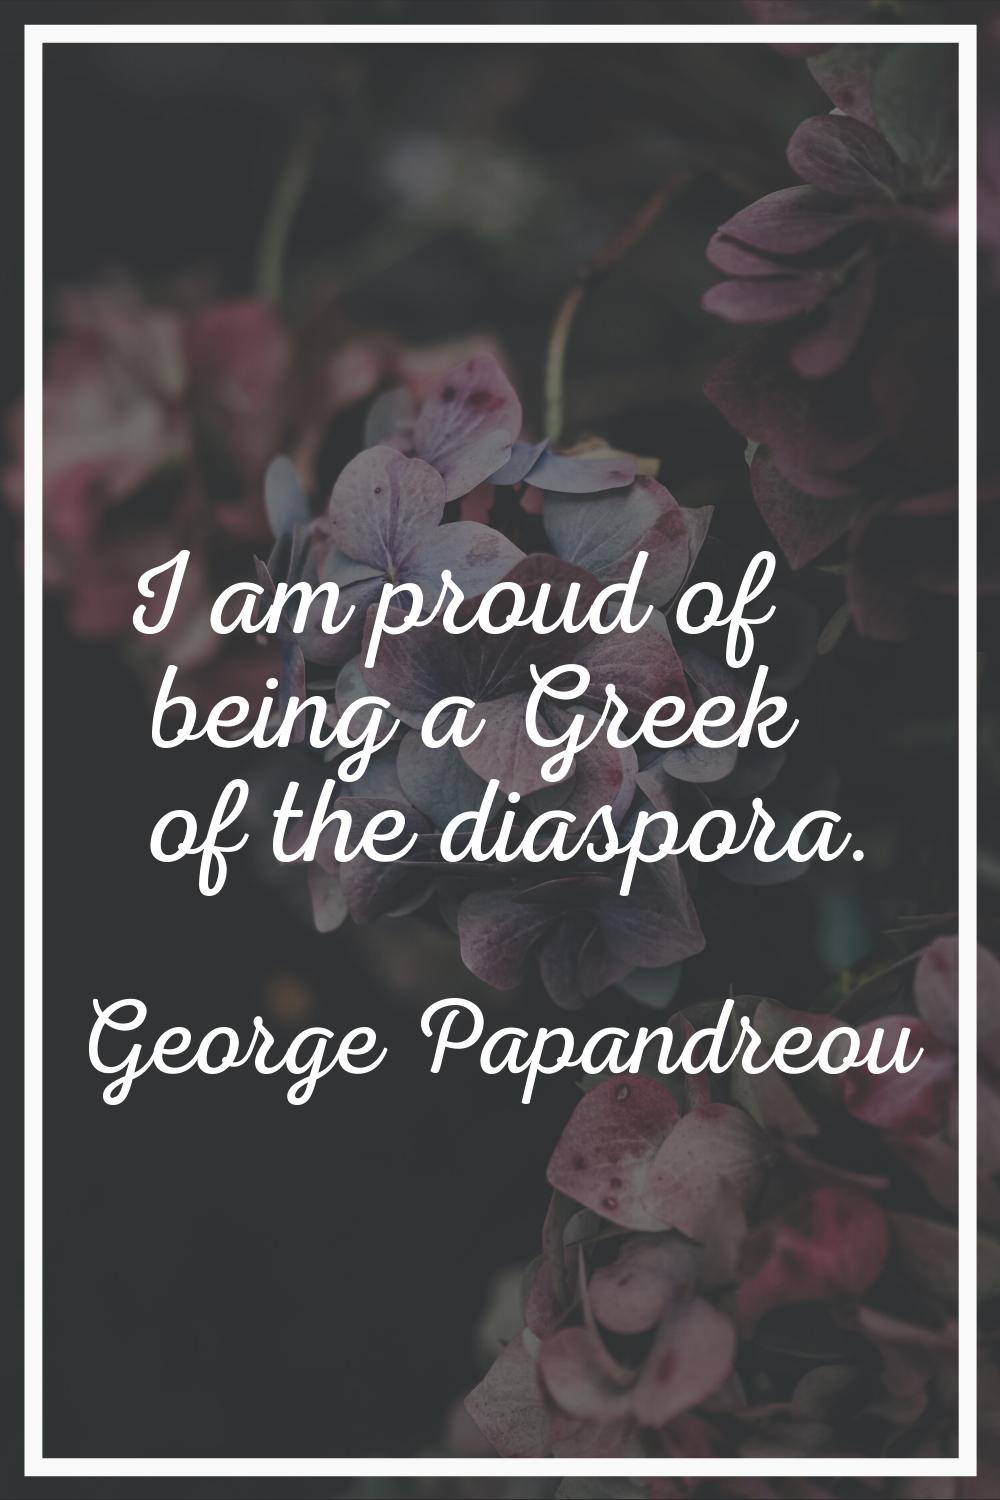 I am proud of being a Greek of the diaspora.